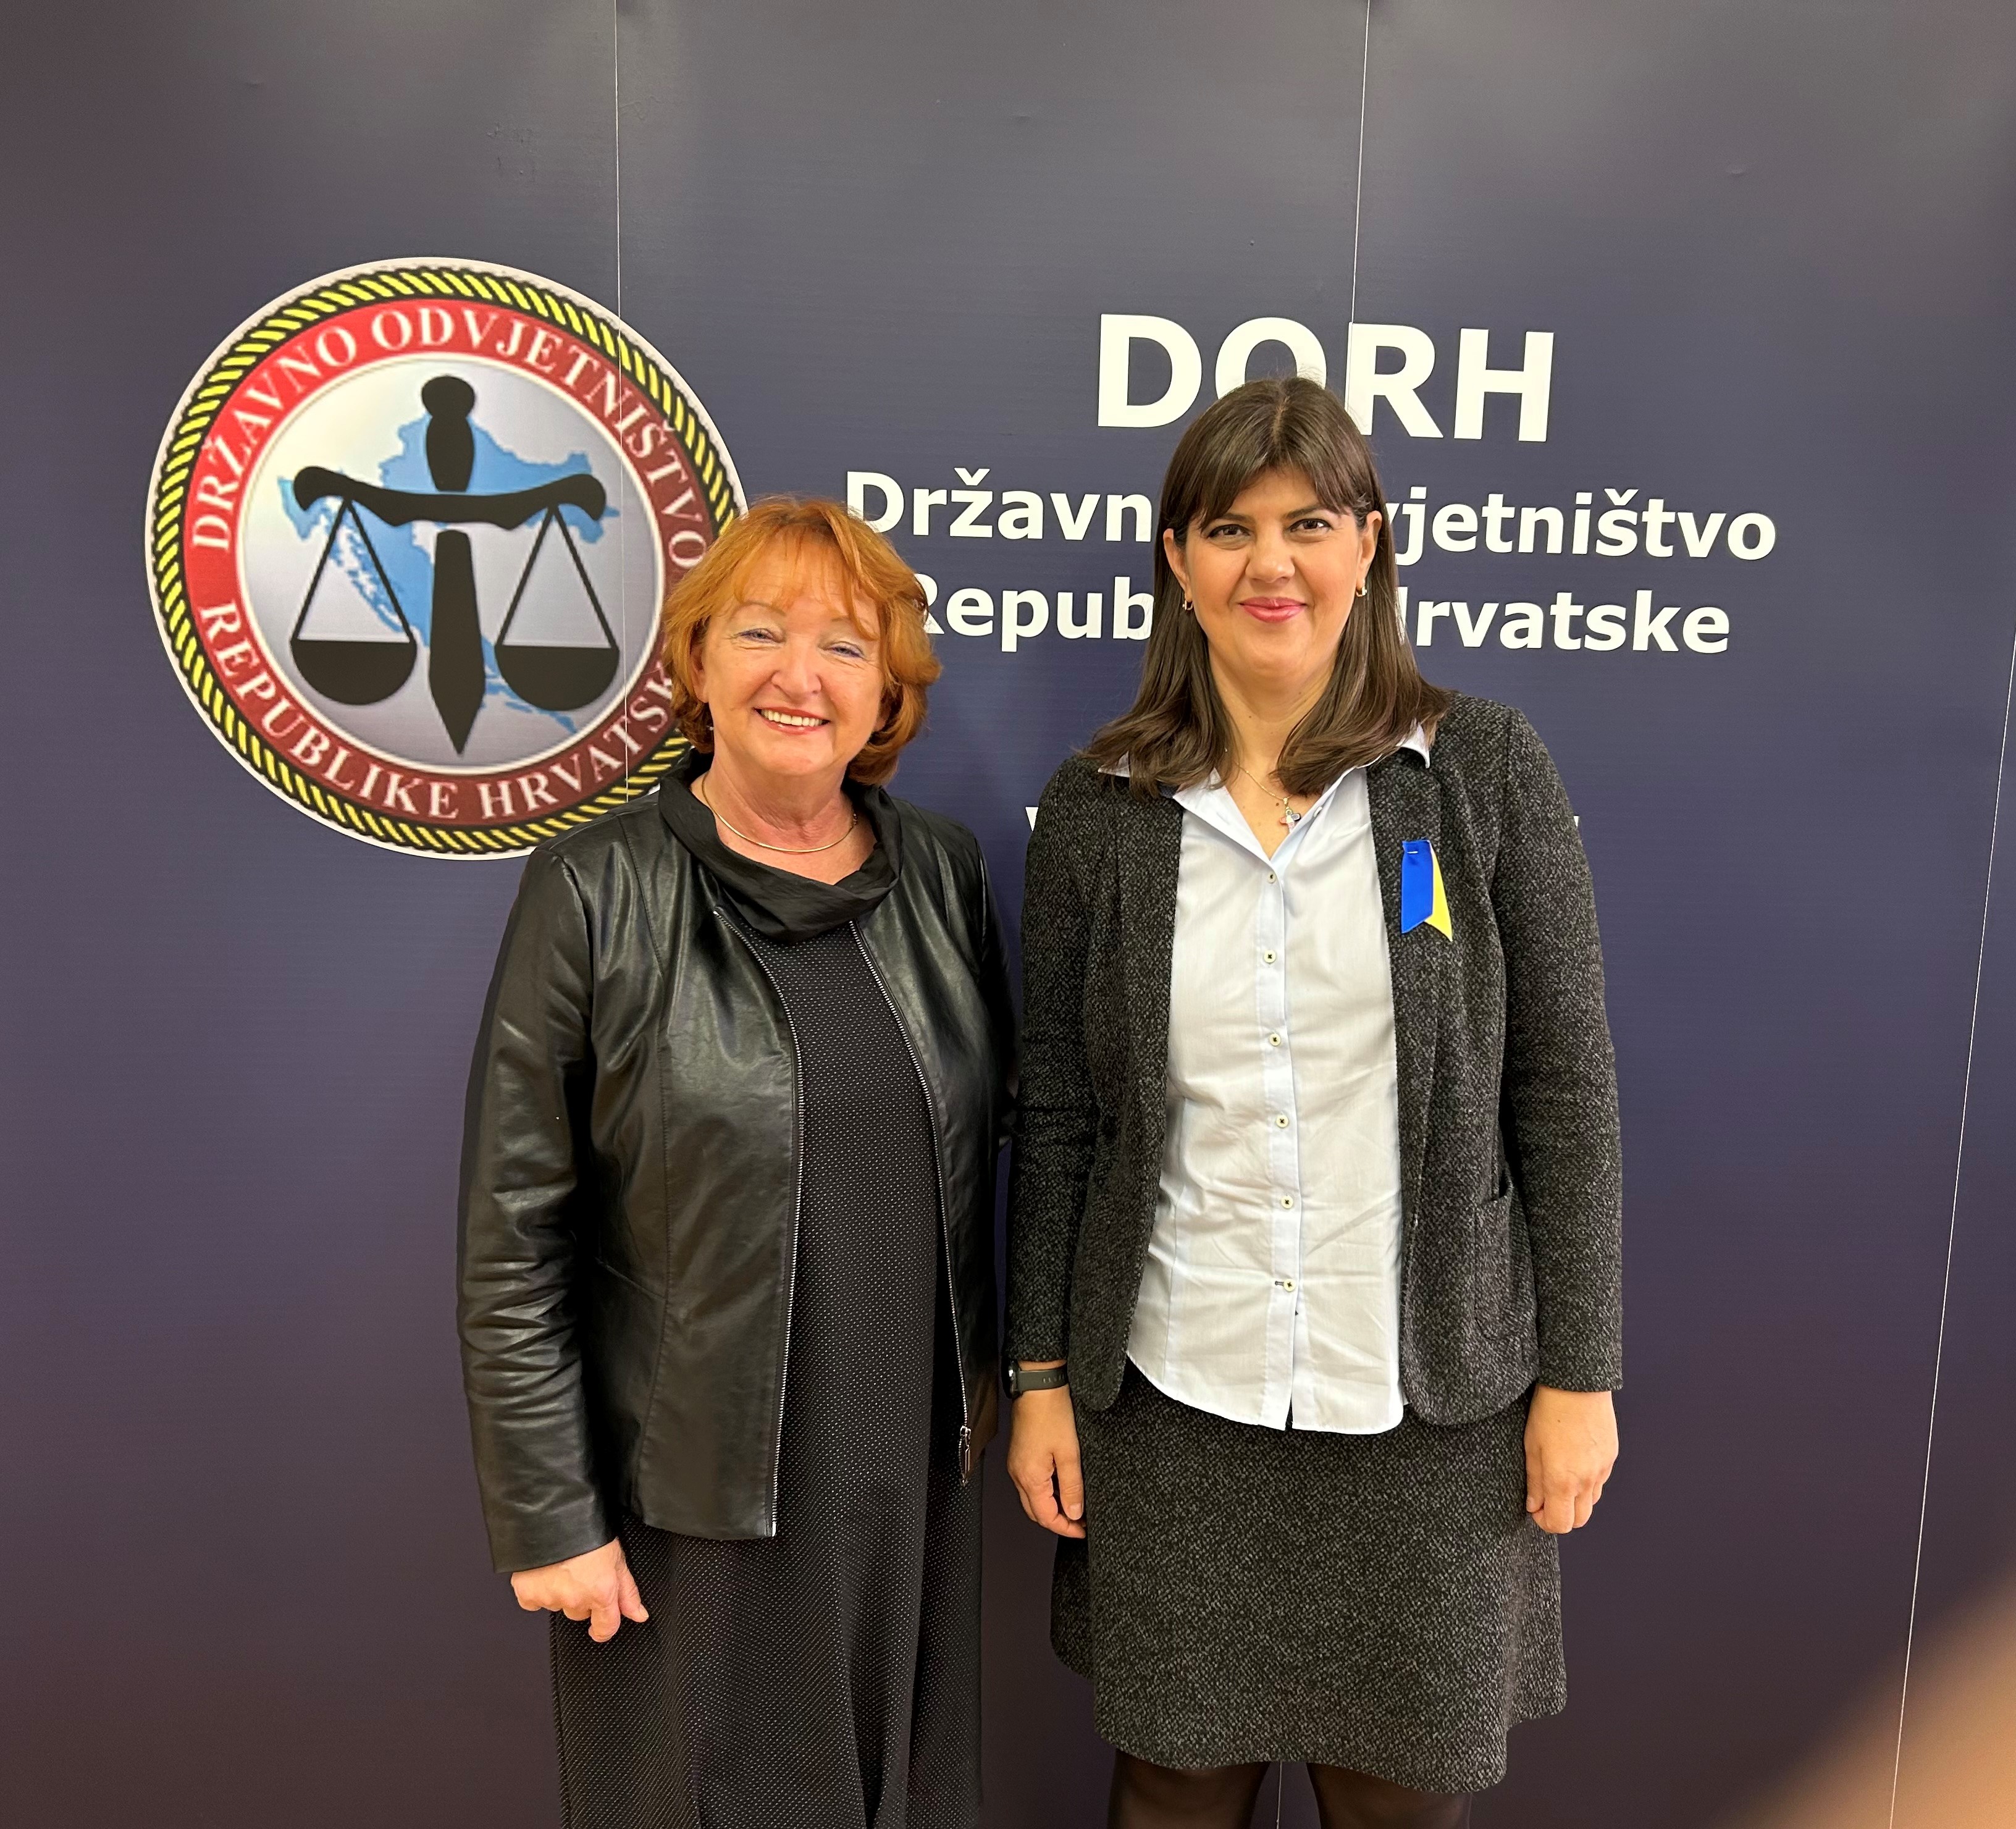 European Chief Prosecutor and State Attorney General